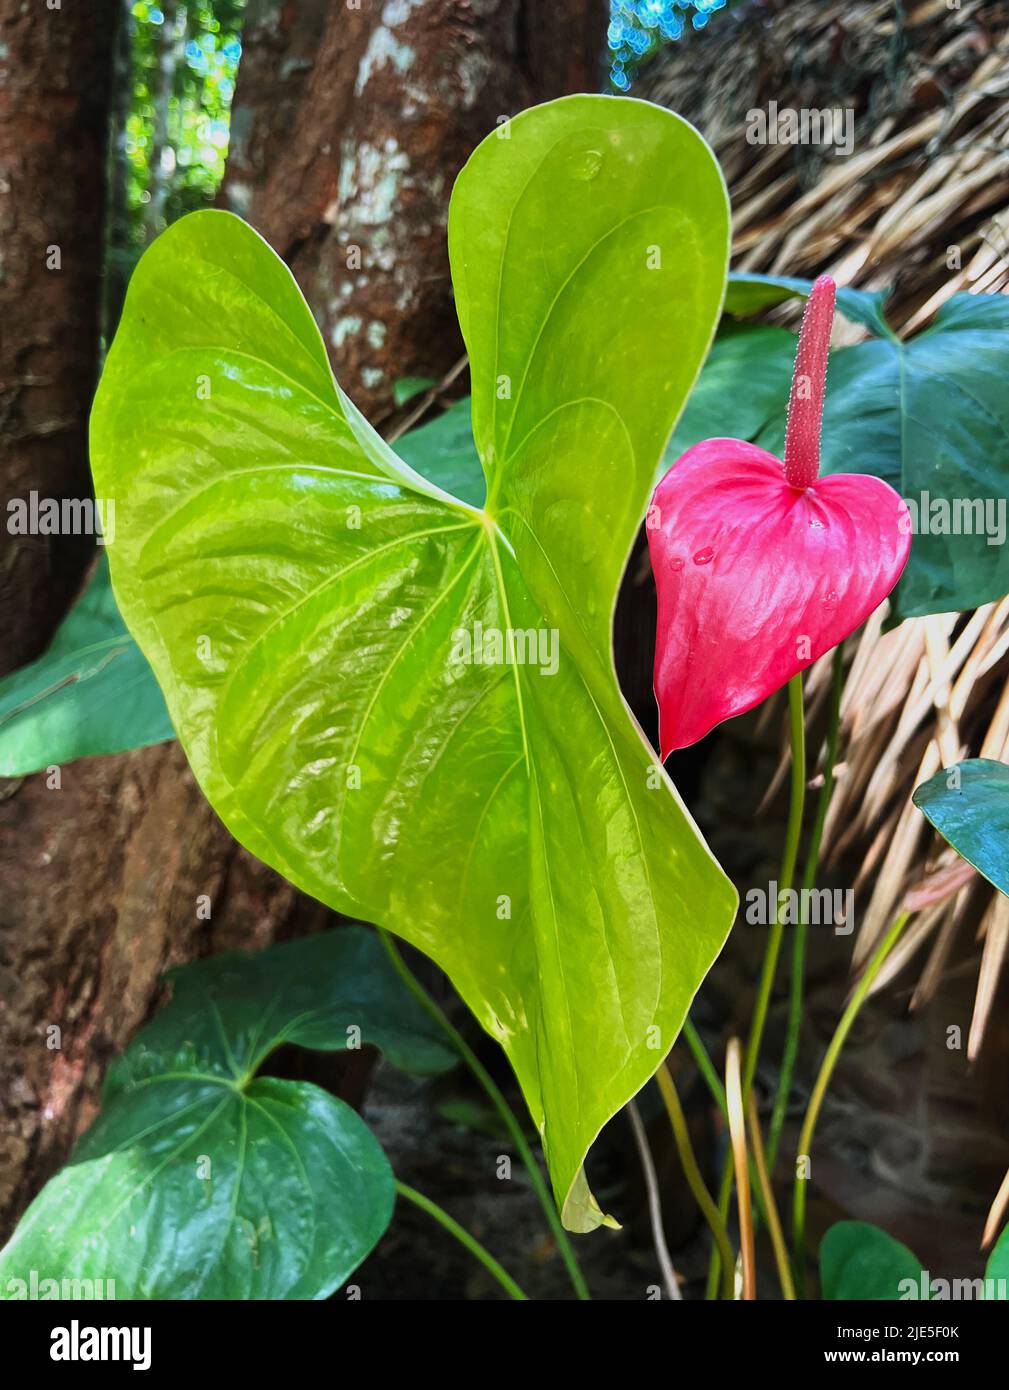 Anthurium pink plant, is a flowering plant, tail flower and lace leaf with green leaf in the garden with other big leave plant and tree. Stock Photo